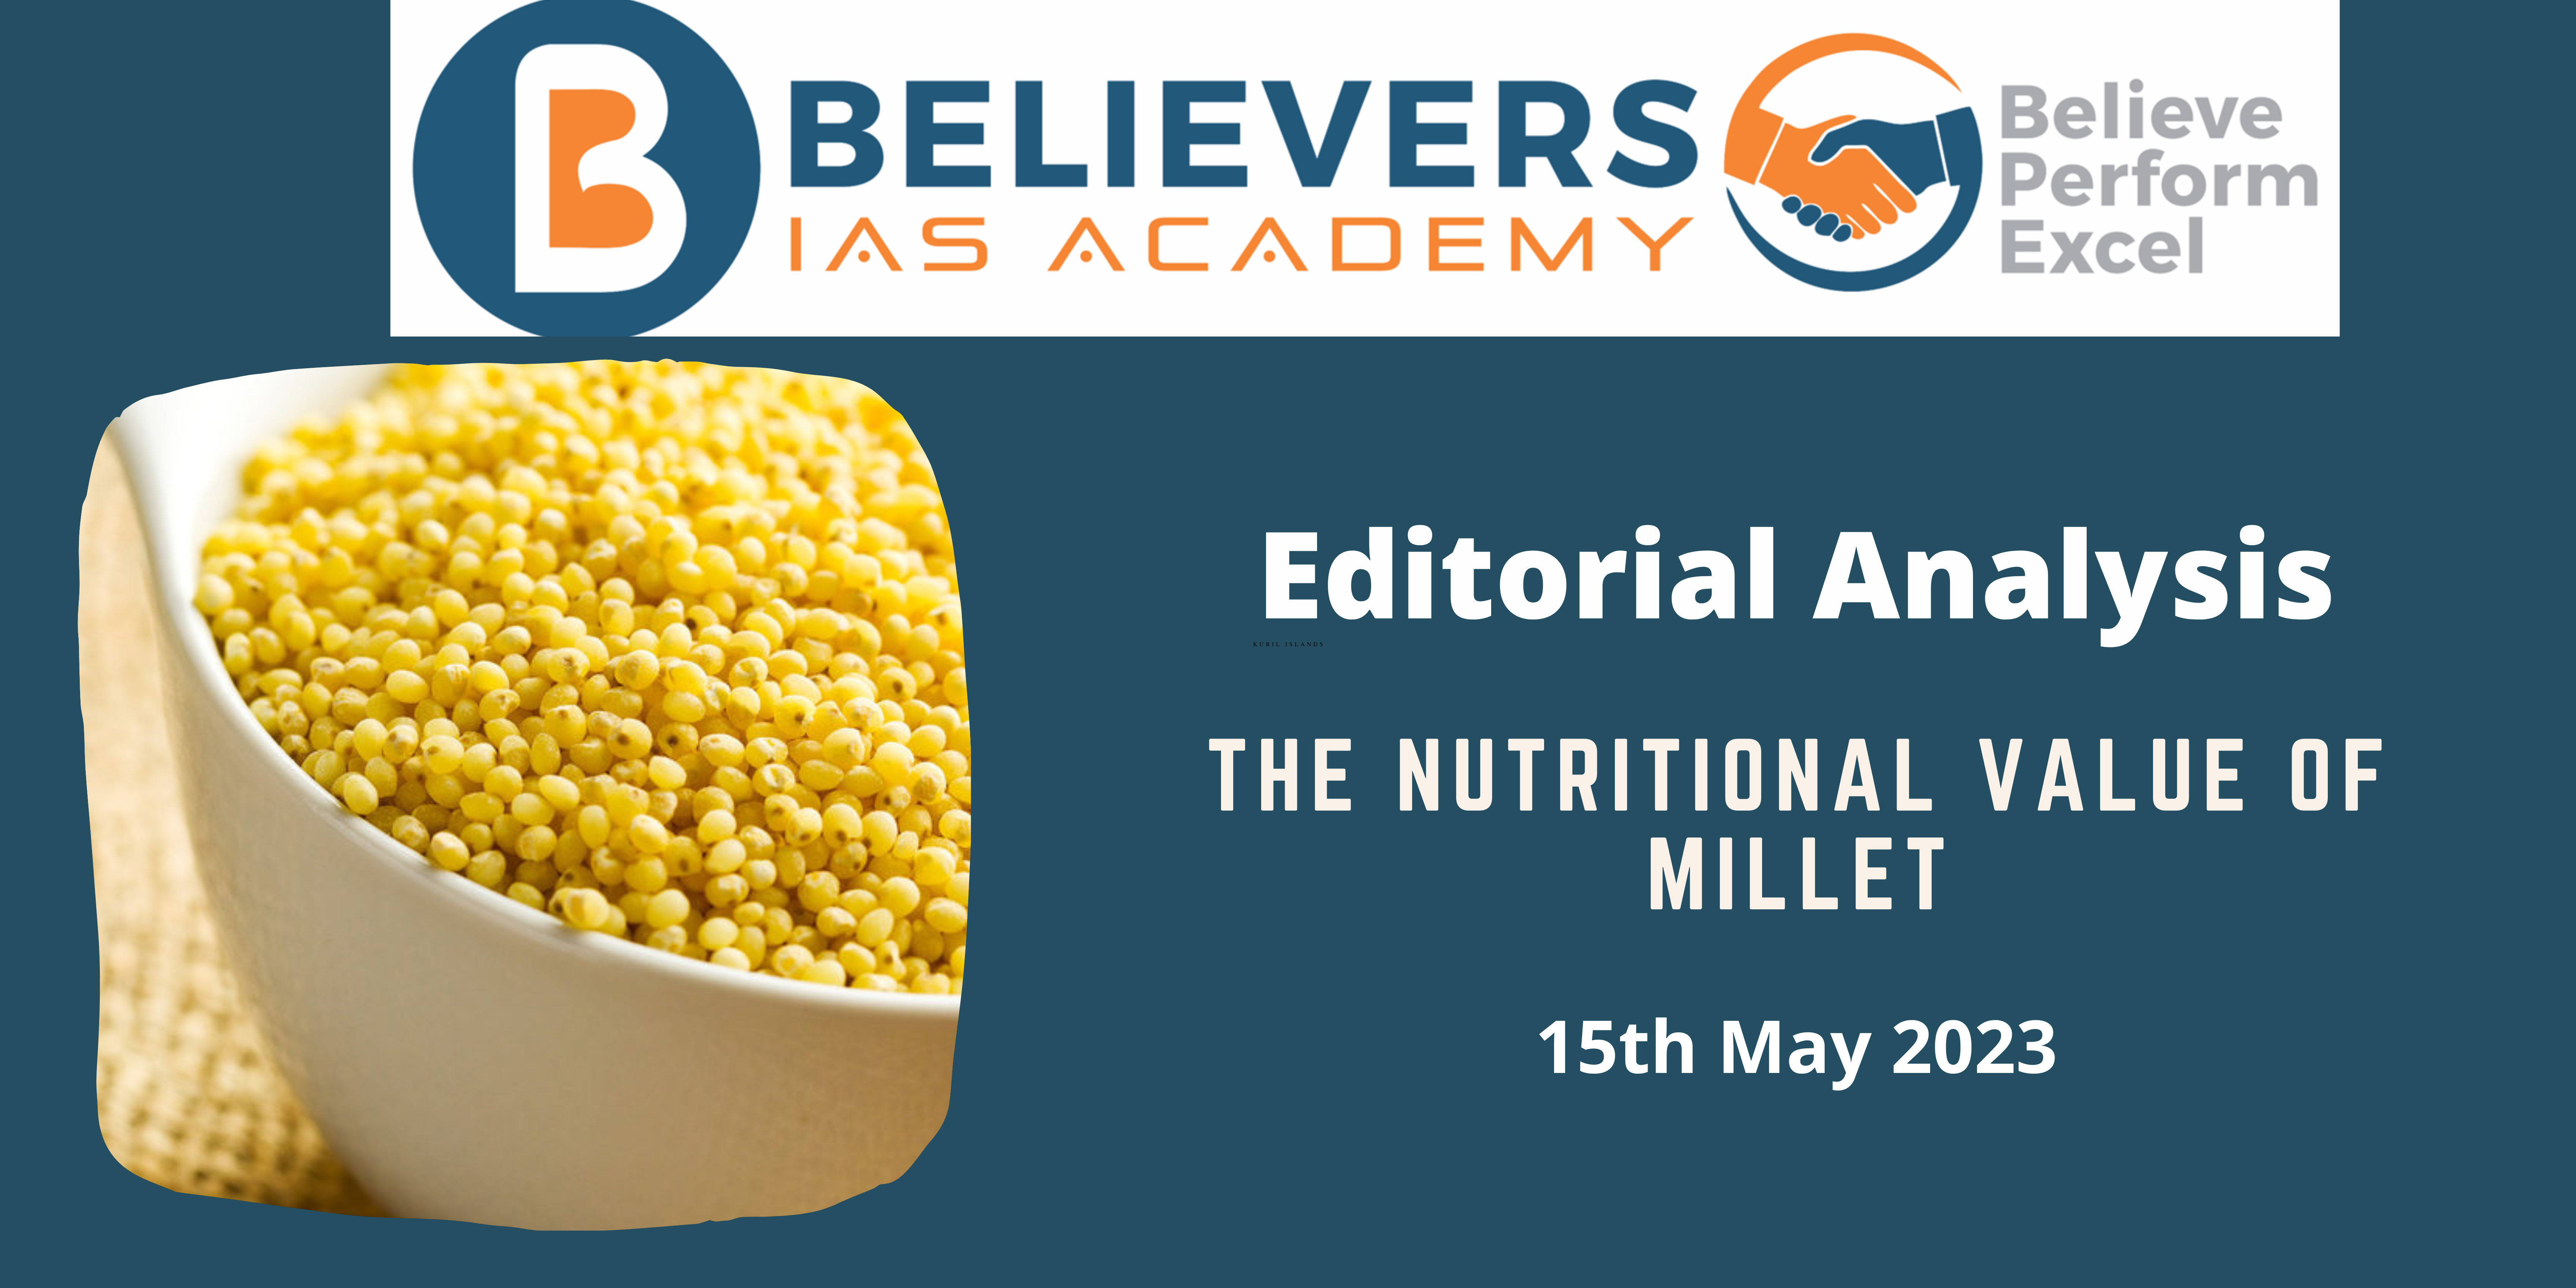 The Nutritional Value Of Millet